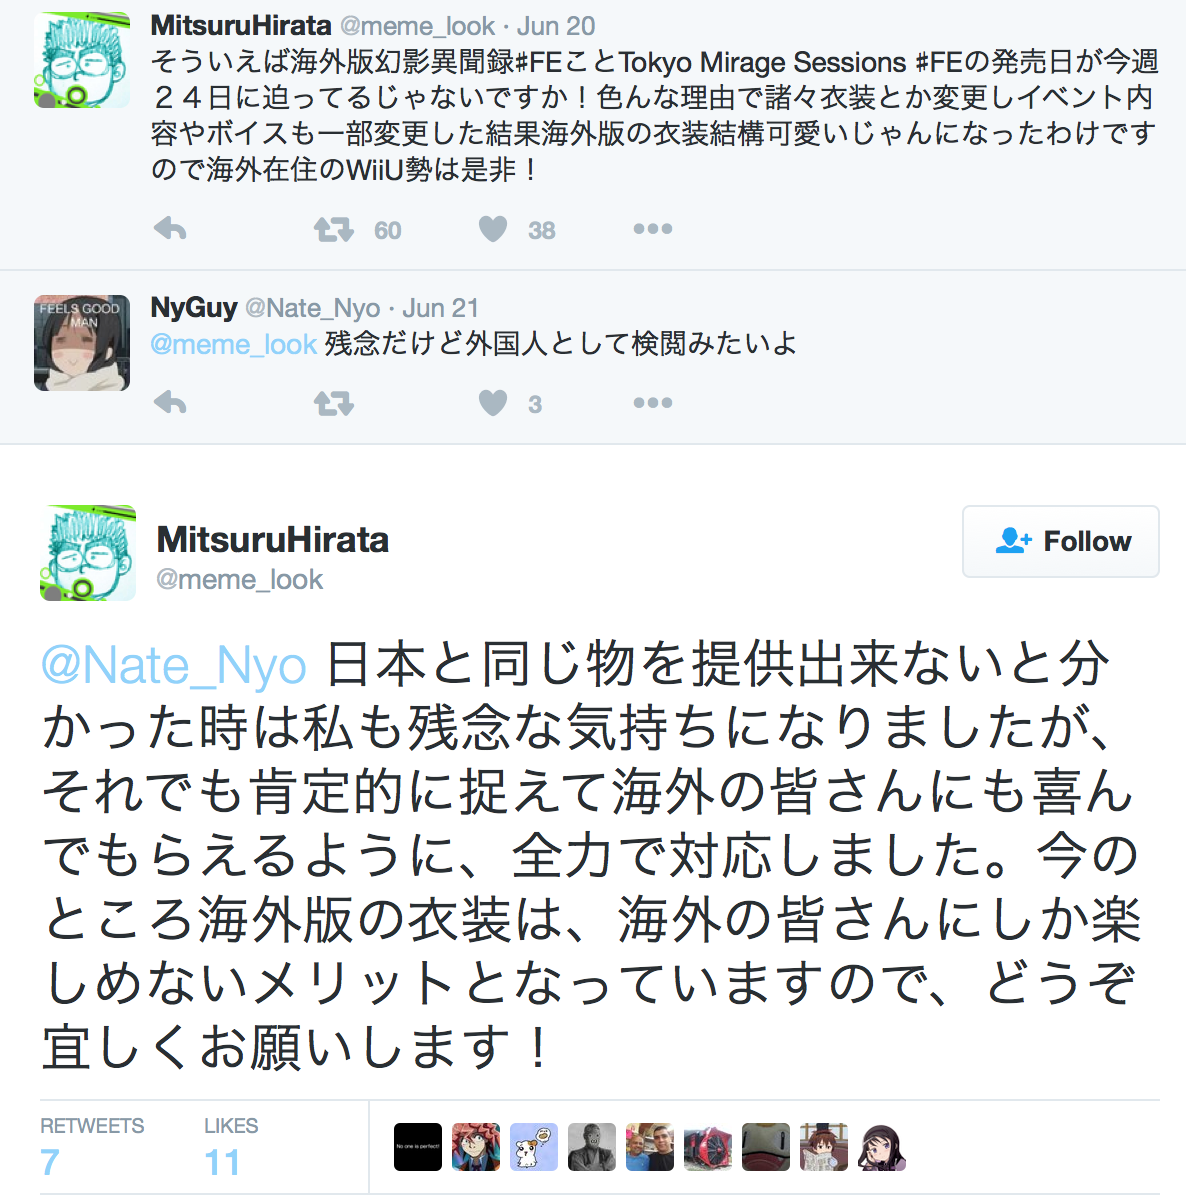 Tokyo_Mirage_Sessions_Censorship_Comments_twitter_Hirata